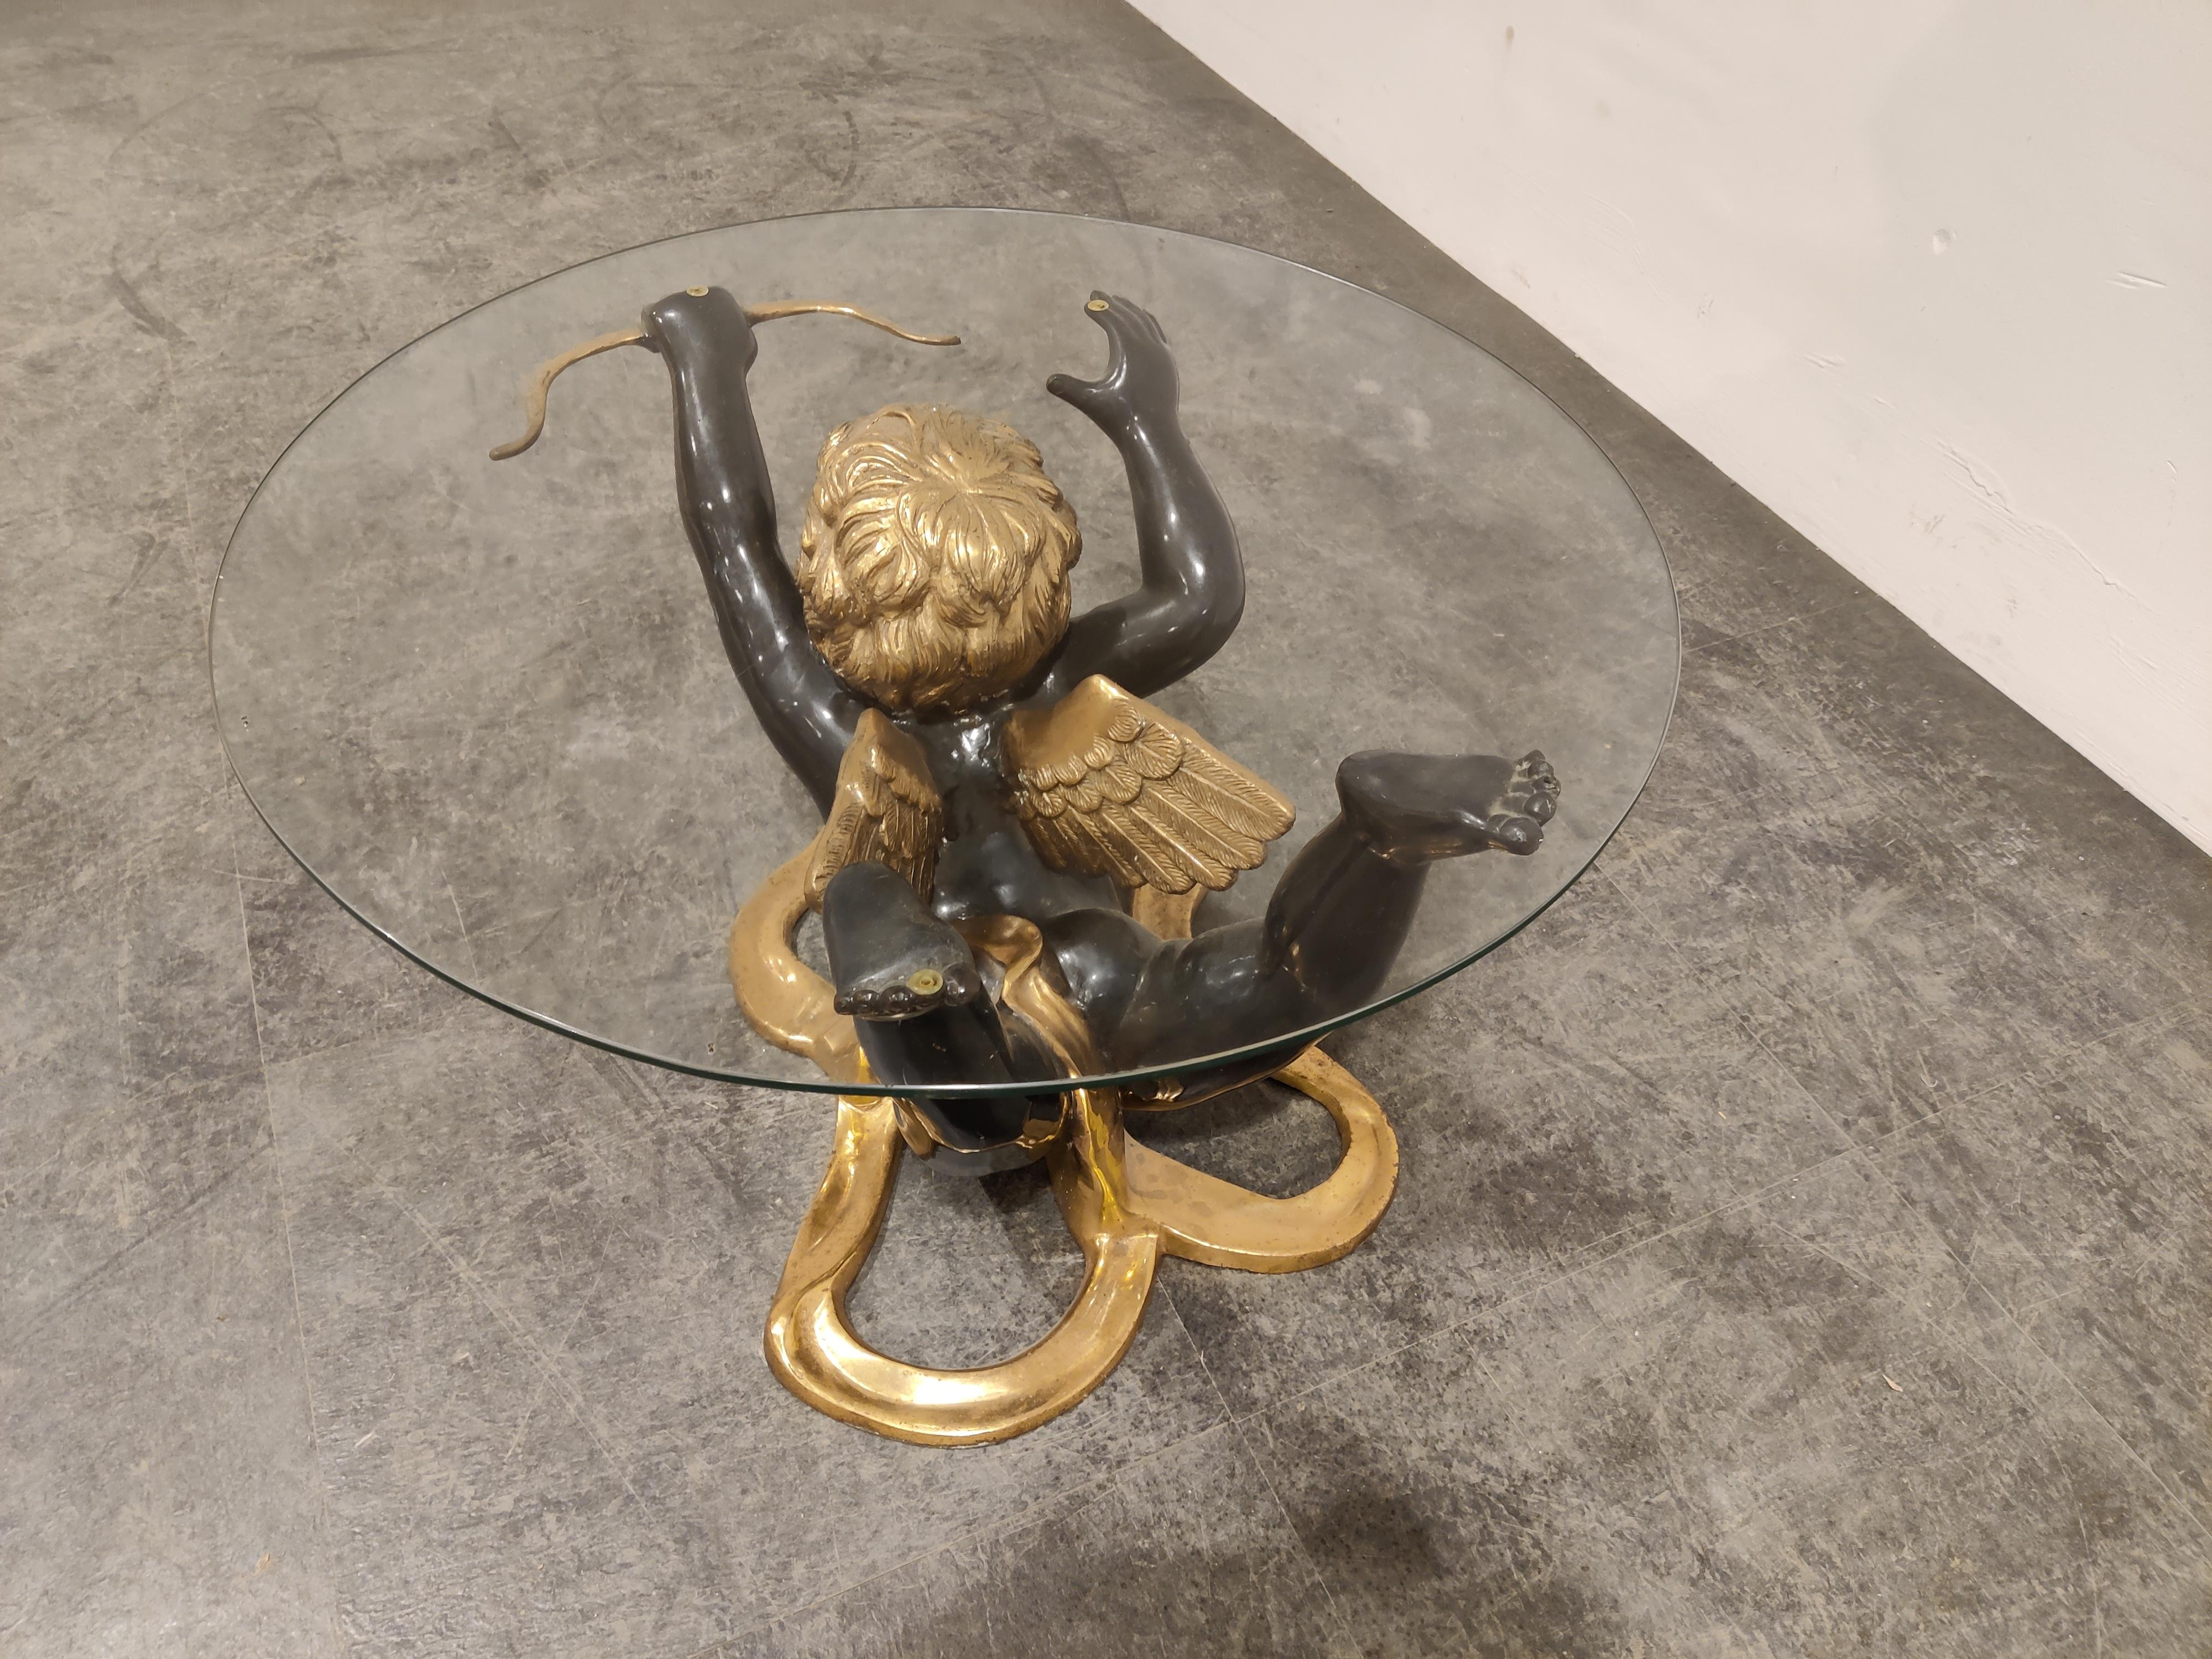 Brass coffee table with a cupid sculpture base.

This beautifully crafted and elegant coffee table comes with a round glass top.

Heavy quality.

1970s - Belgium

Dimensions:
Table:
Diameter: 70cm/27.55